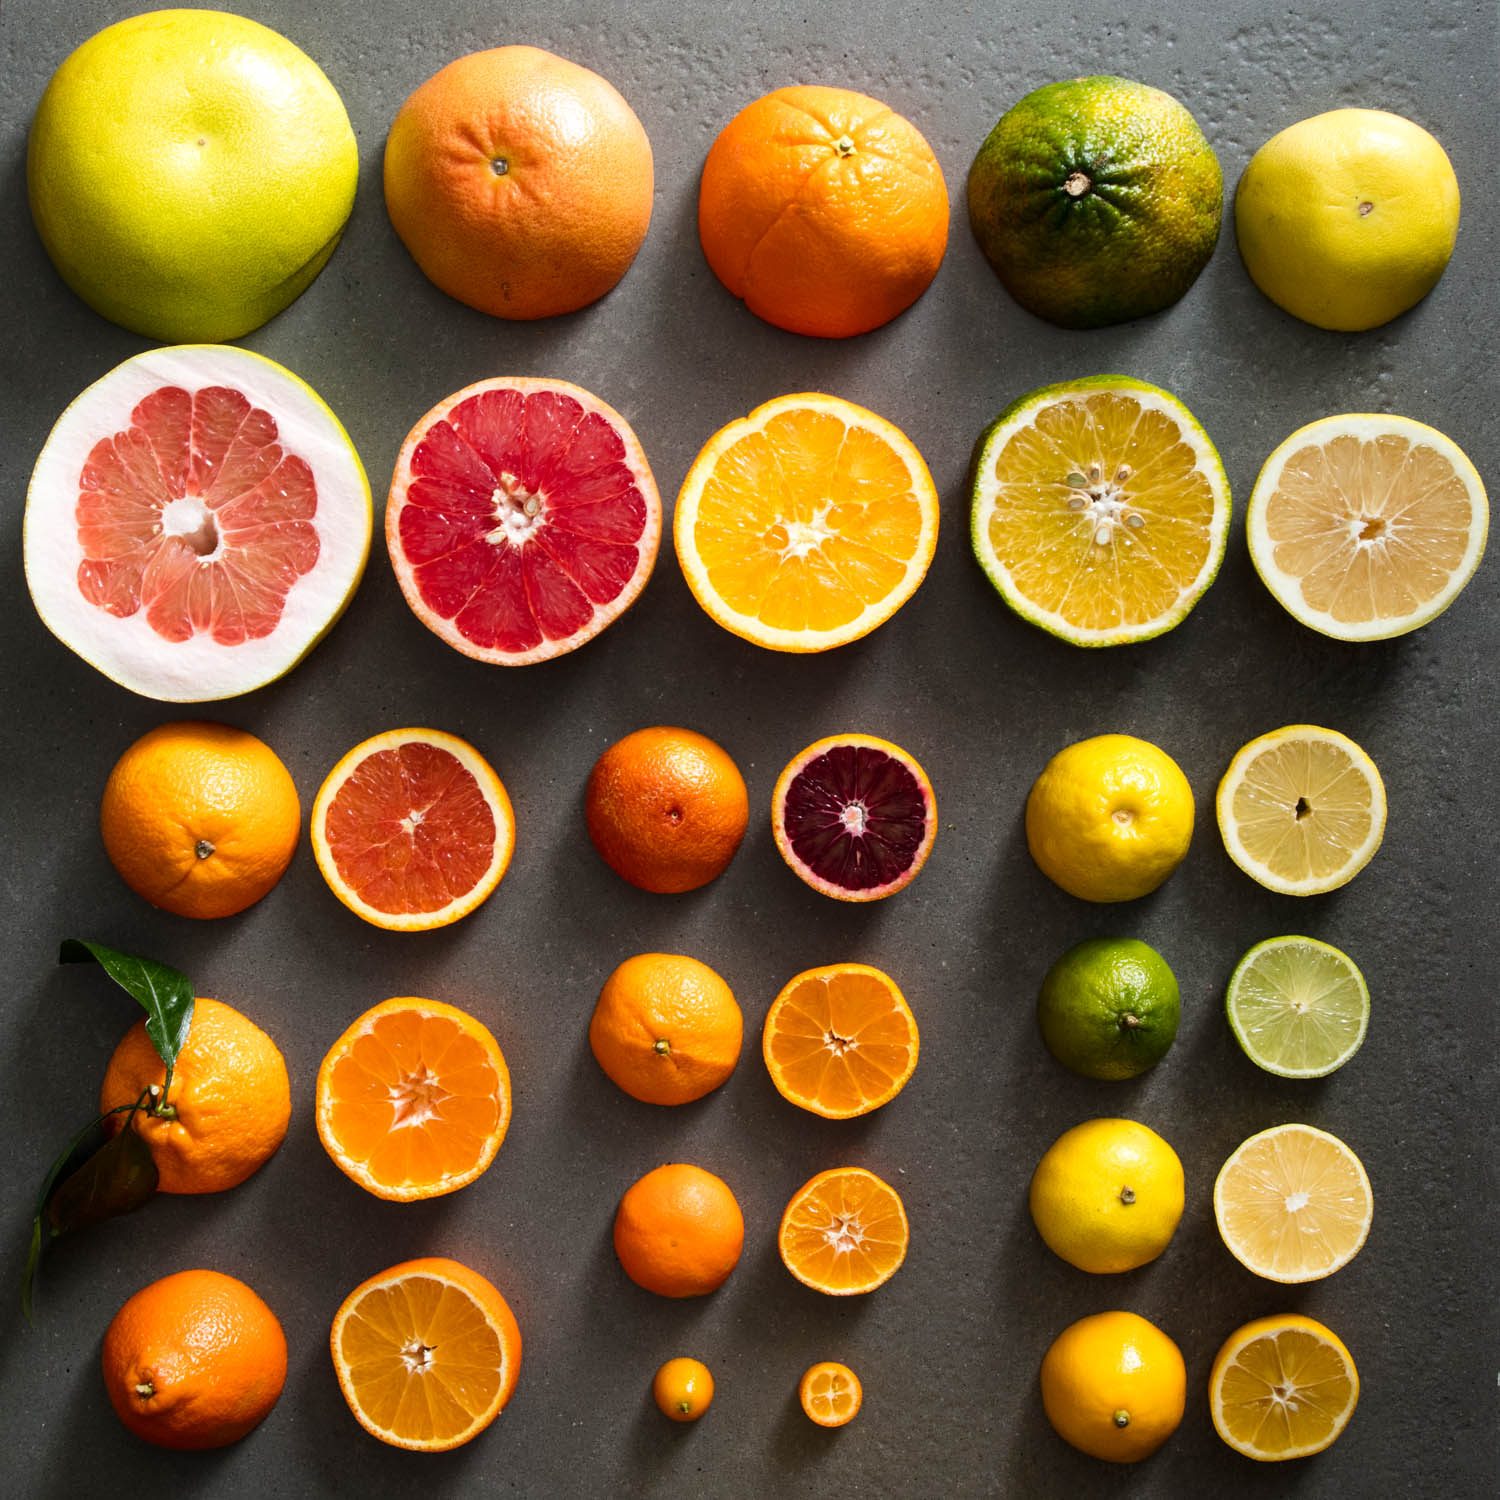 Know Your Citrus: A Field Guide to Oranges, Lemons, Limes, and ...